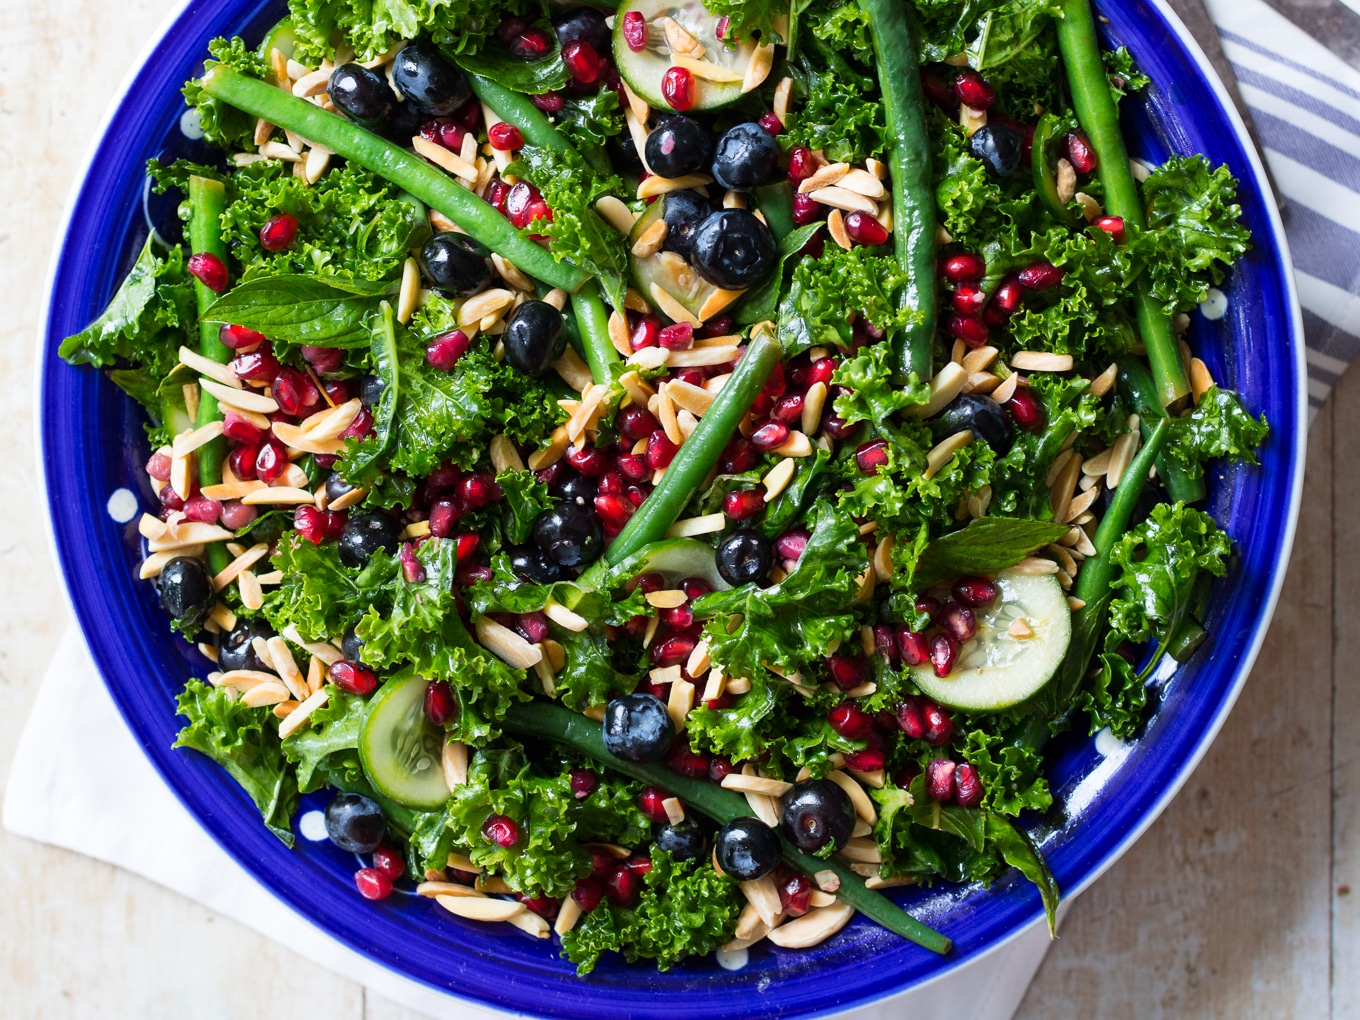 Blueberry kale salad recipe made with massaged kale in olive oil, green beans, cucumber, mint, blueberries, pomegranate and toasted almonds.